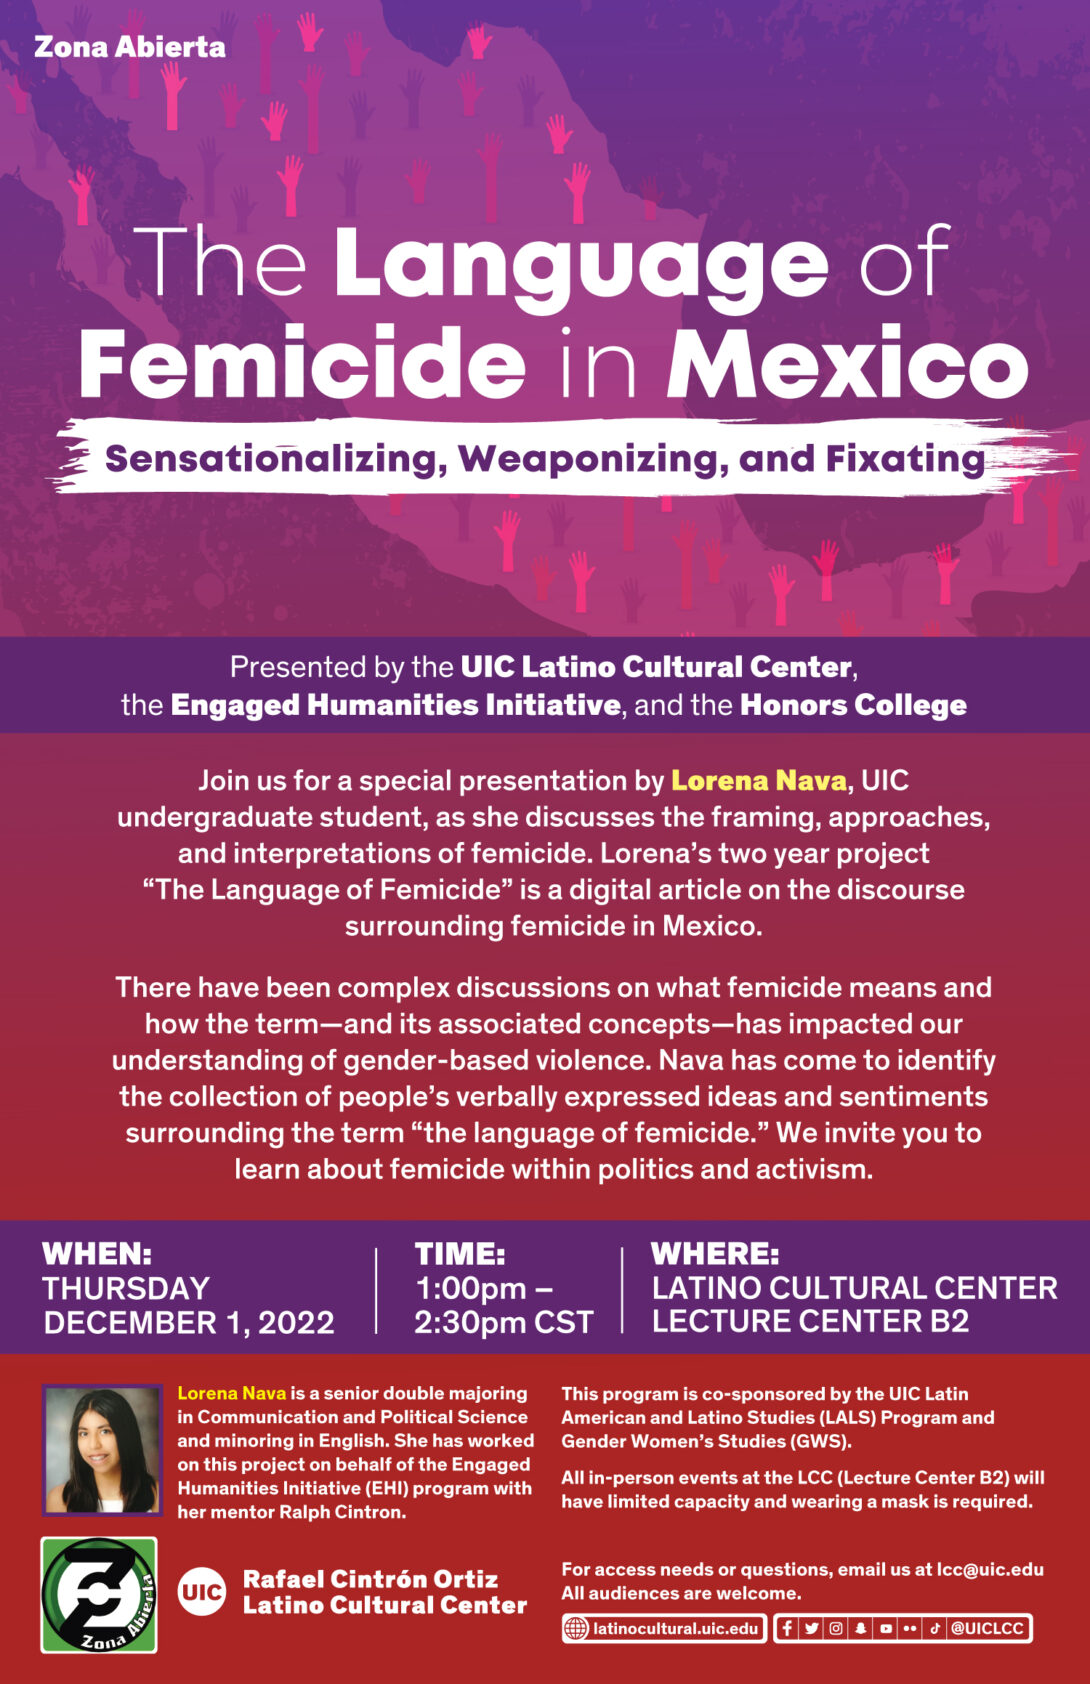 language of femicide in mexico, purple to red ombre background, white text